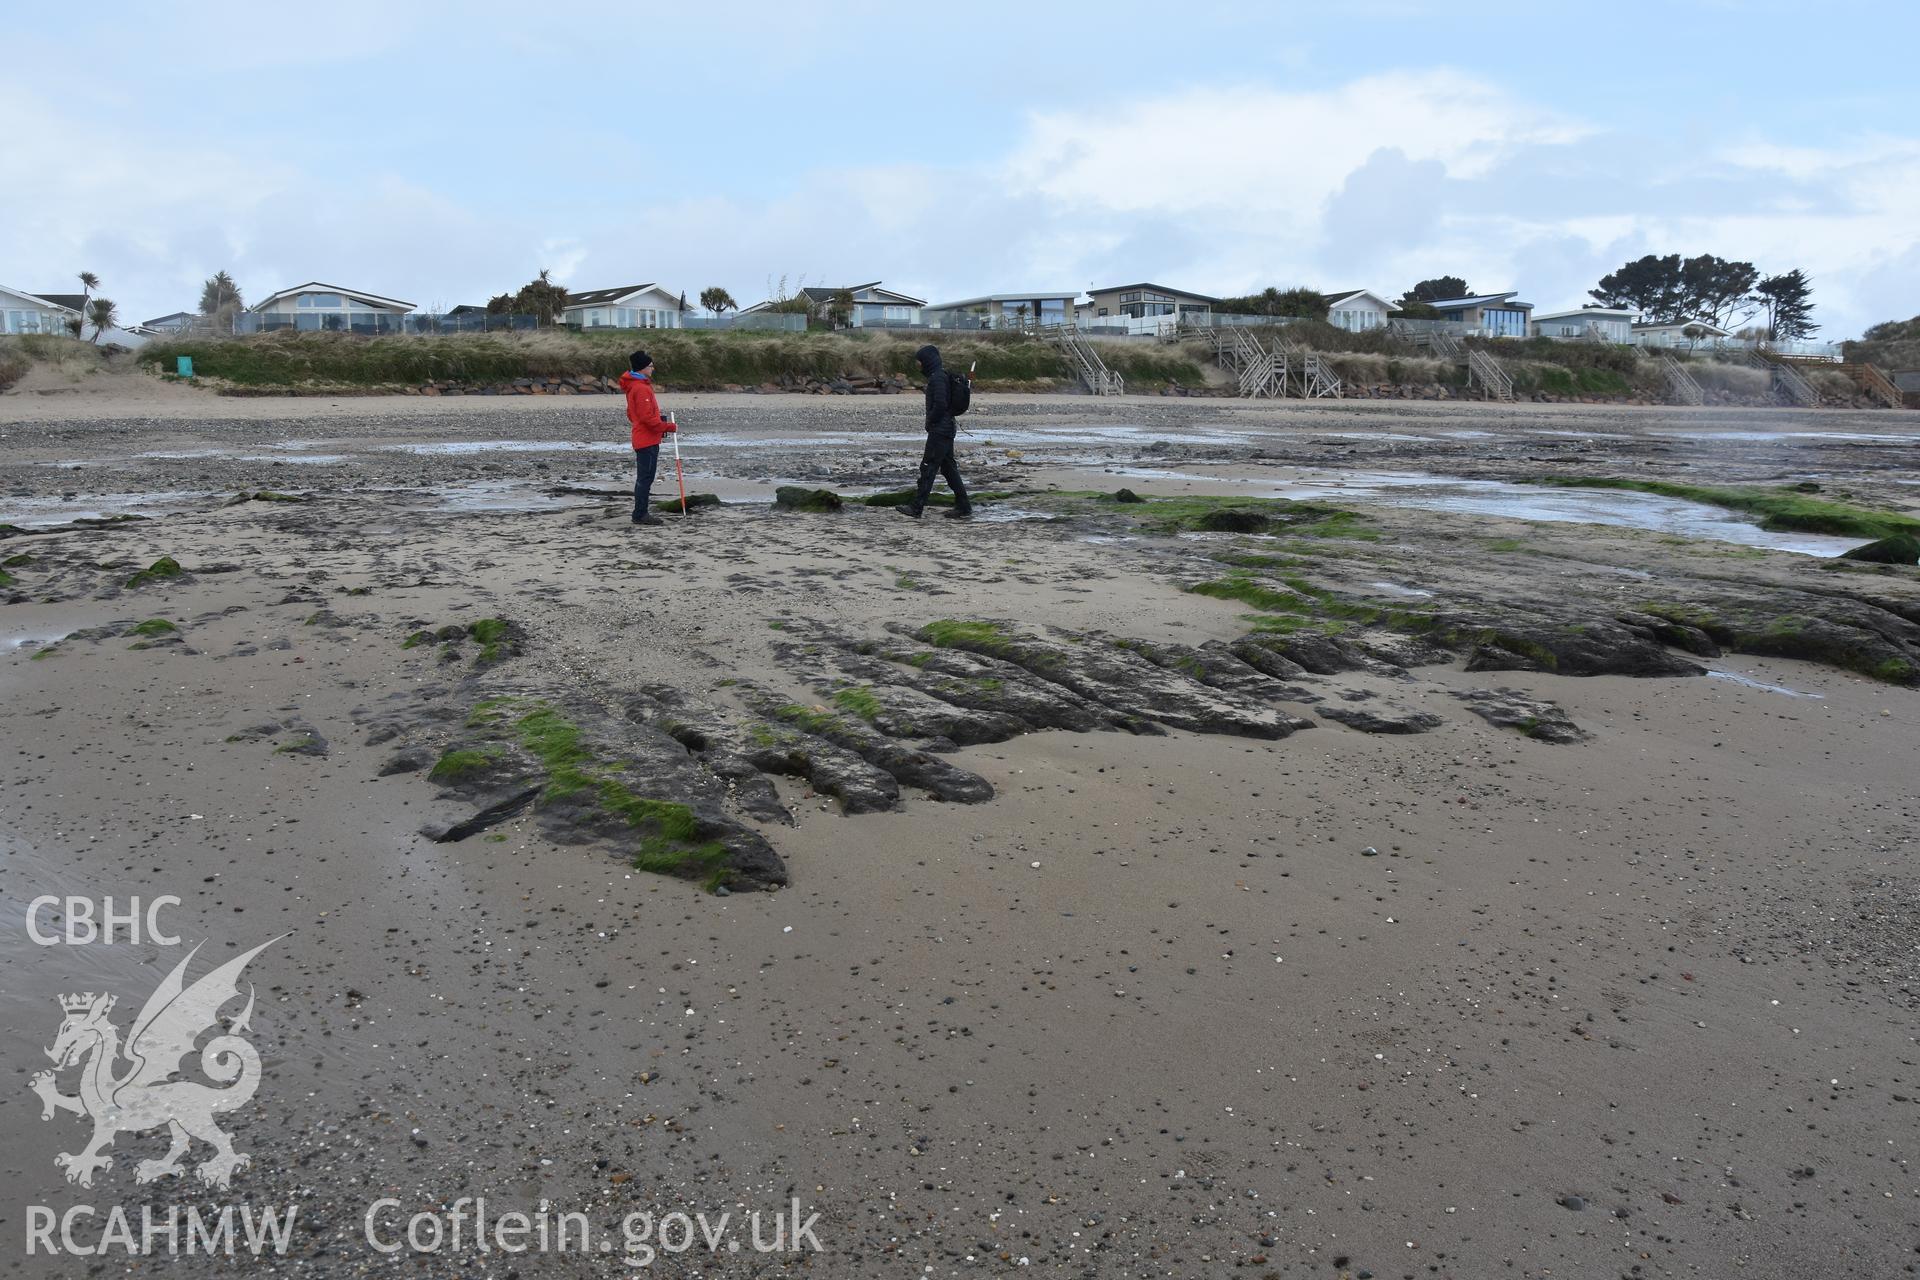 General view of peat exposures on The Warren beach, Abersoch, April 2018, including prehistoric animal footprints and later peat cuttings.Recorded with GNSS and photogrammetry for the CHERISH Project. ? Crown: CHERISH PROJECT 2018. Produced with EU funds through the Ireland Wales Co-operation Programme 2014-2020. All material made freely available through the Open Government Licence.